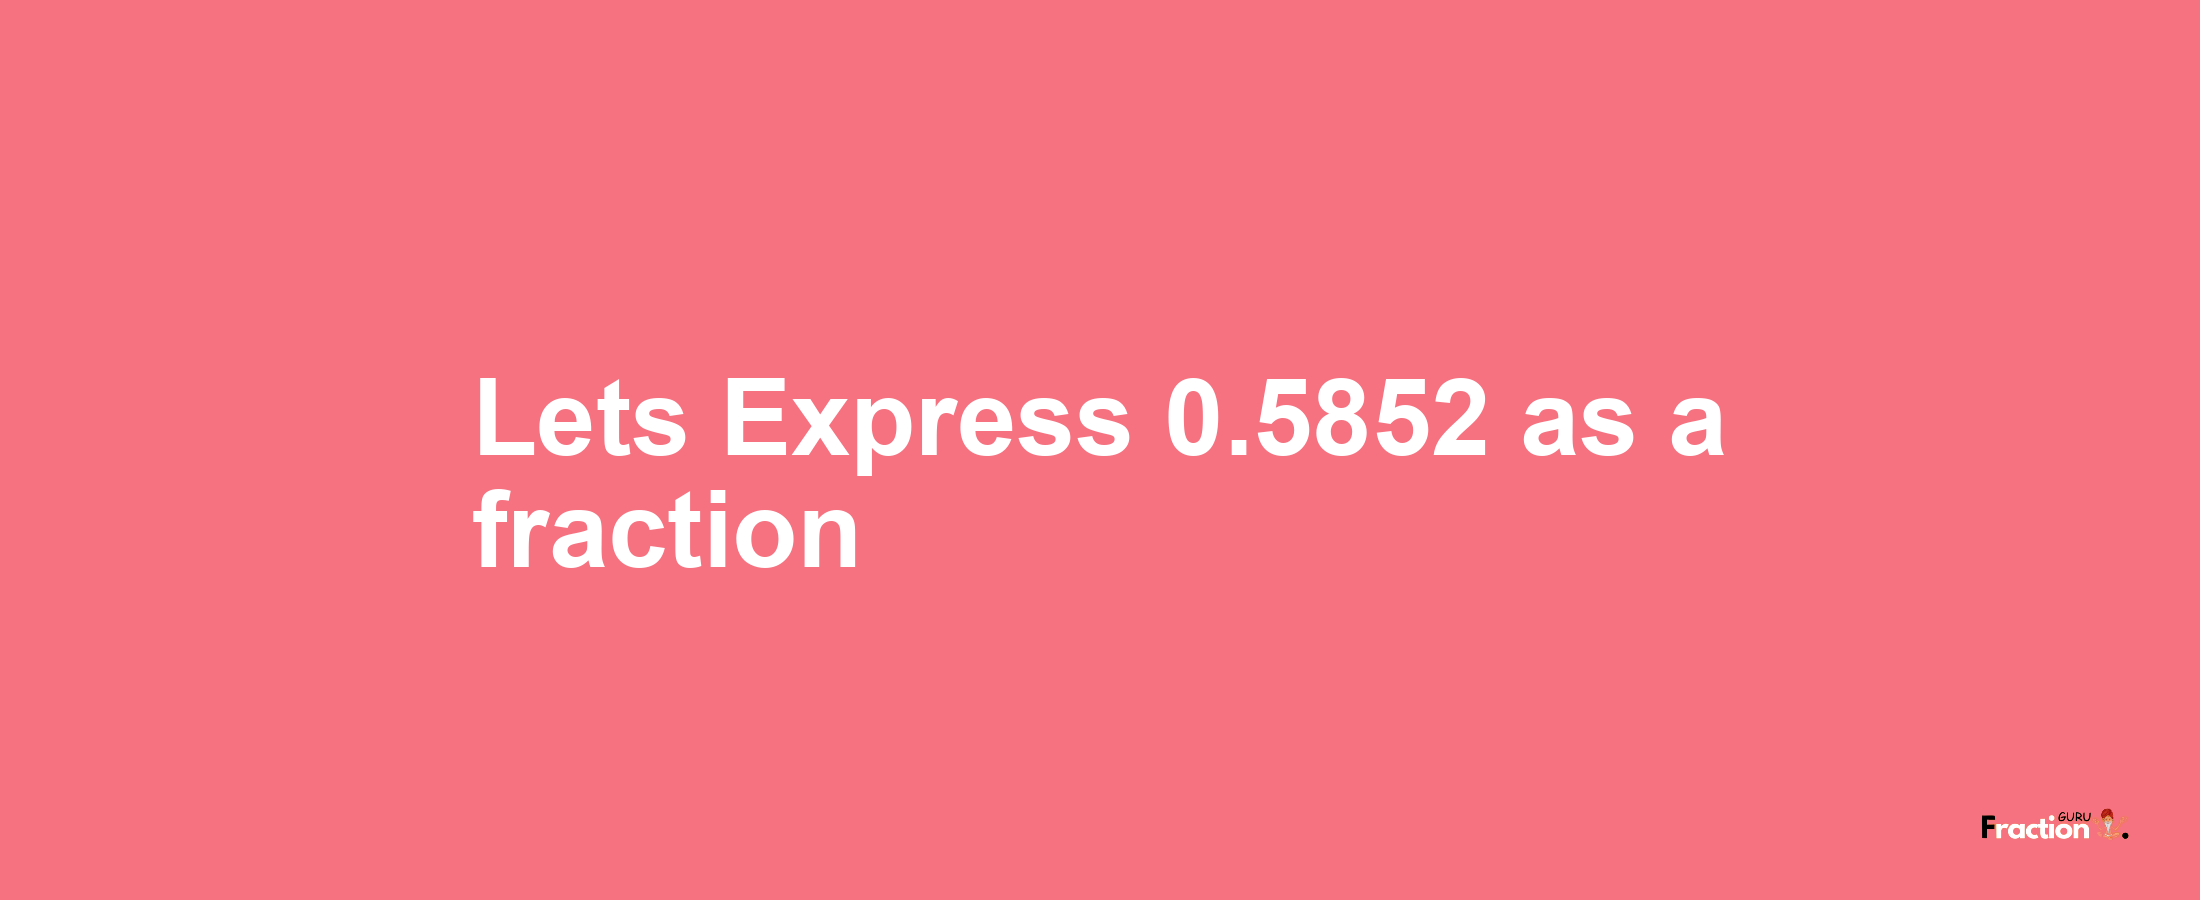 Lets Express 0.5852 as afraction